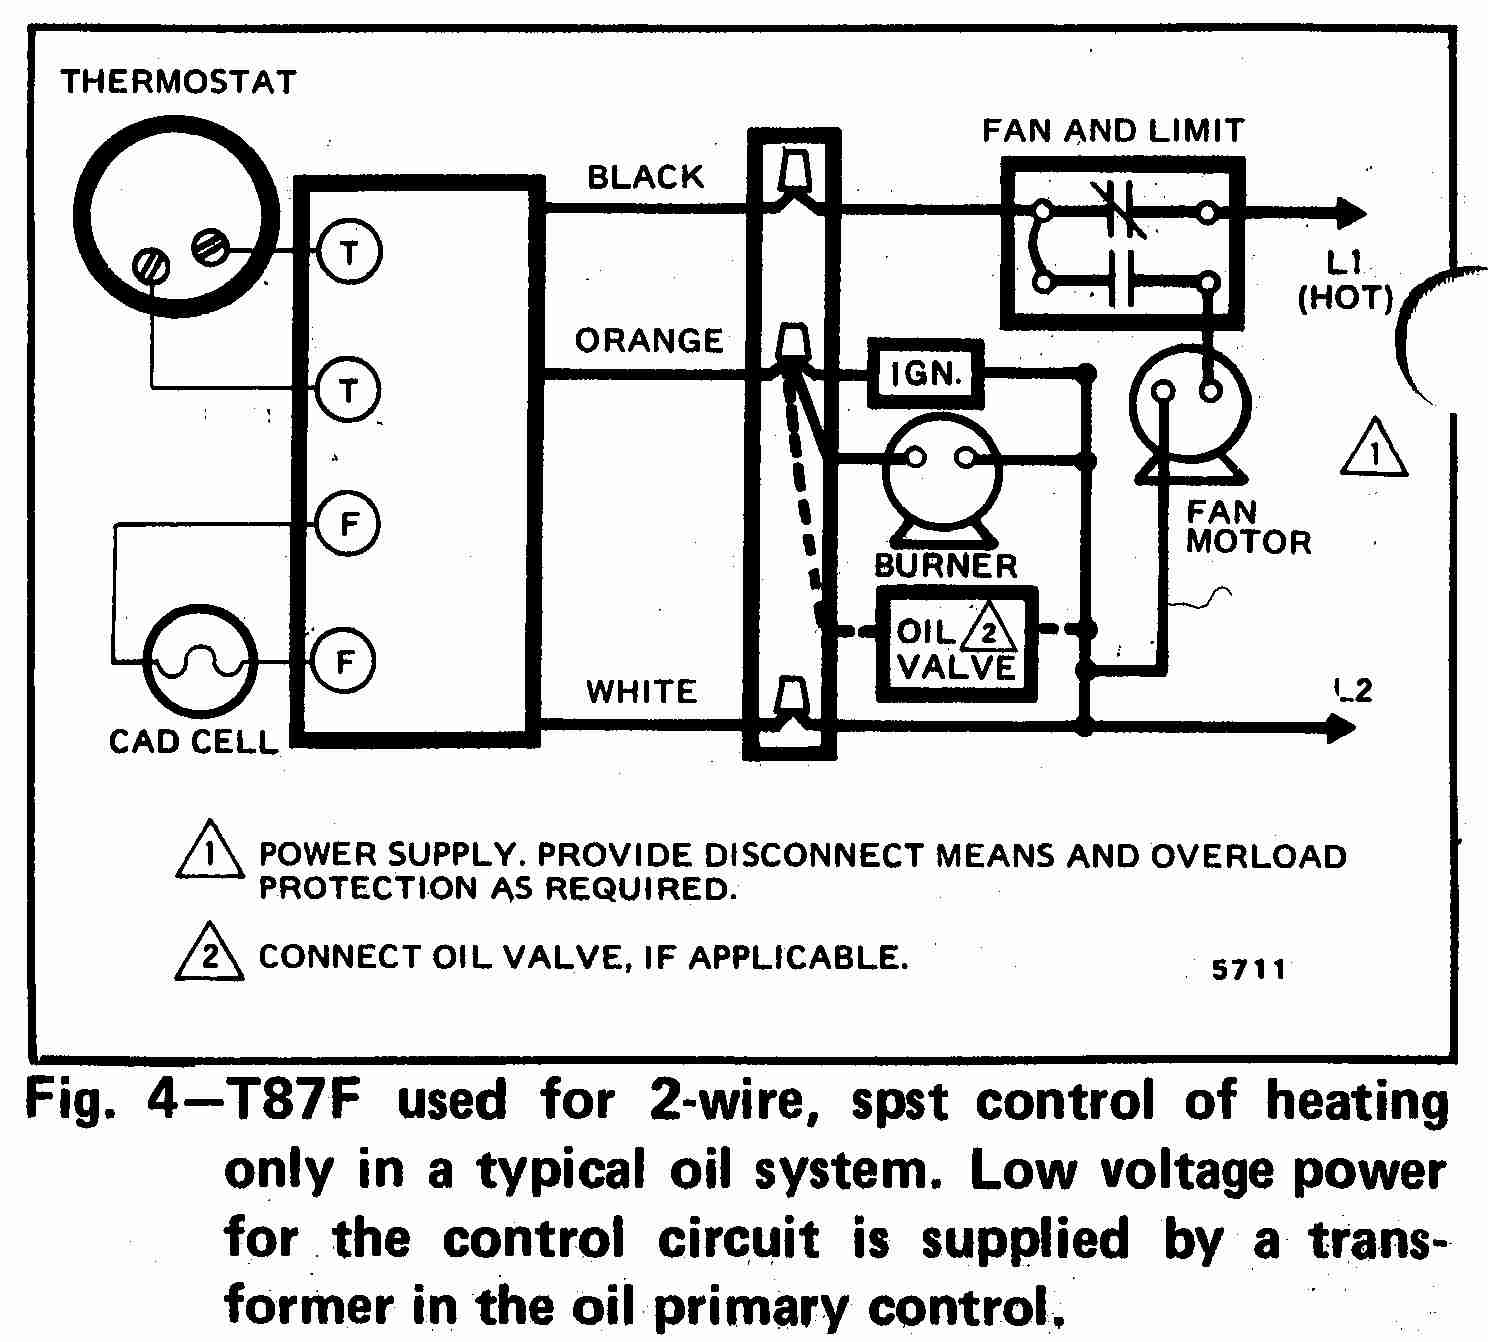 Room Thermostat Wiring Diagrams For Hvac Systems - Air Conditioner Thermostat Wiring Diagram